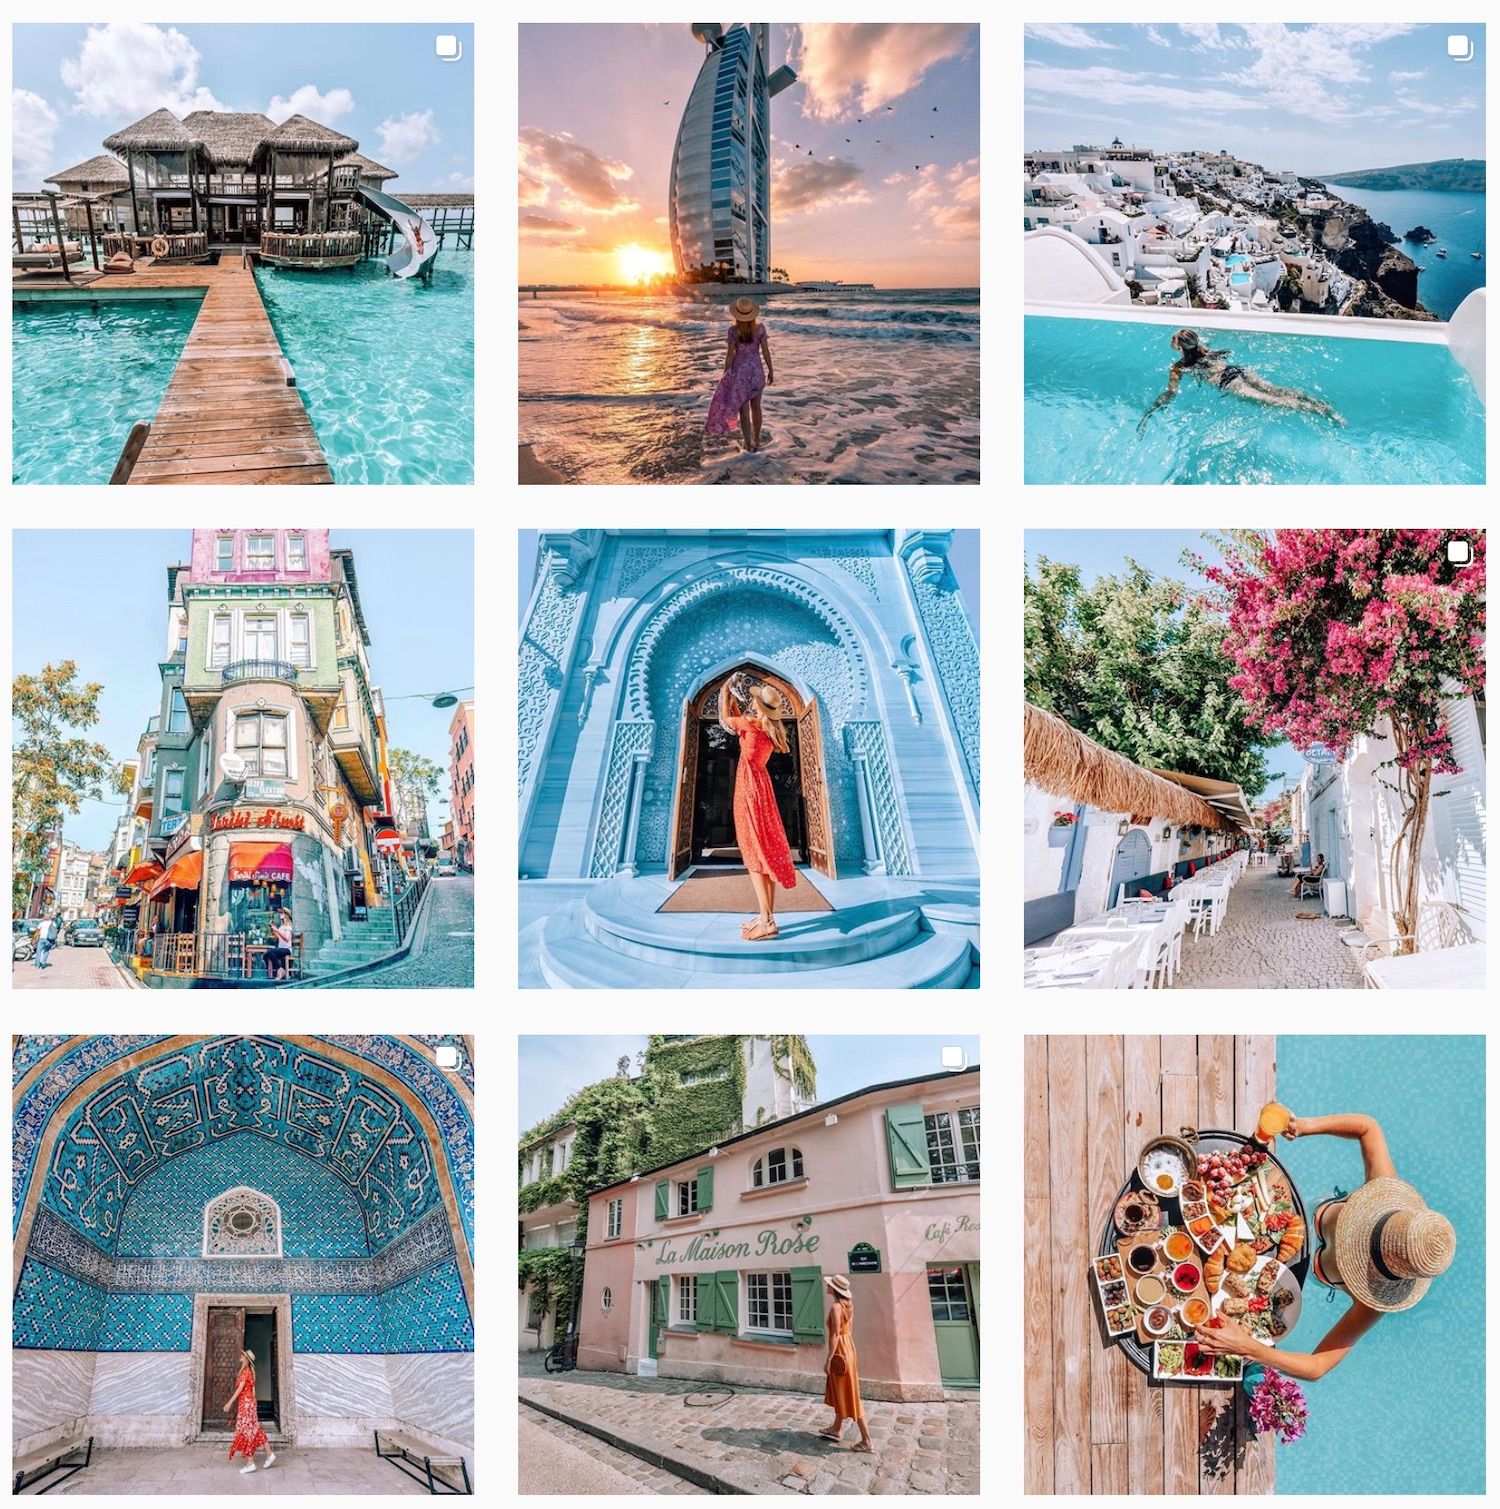 Top 13 Travel Influencers on Instagram to follow in 2020